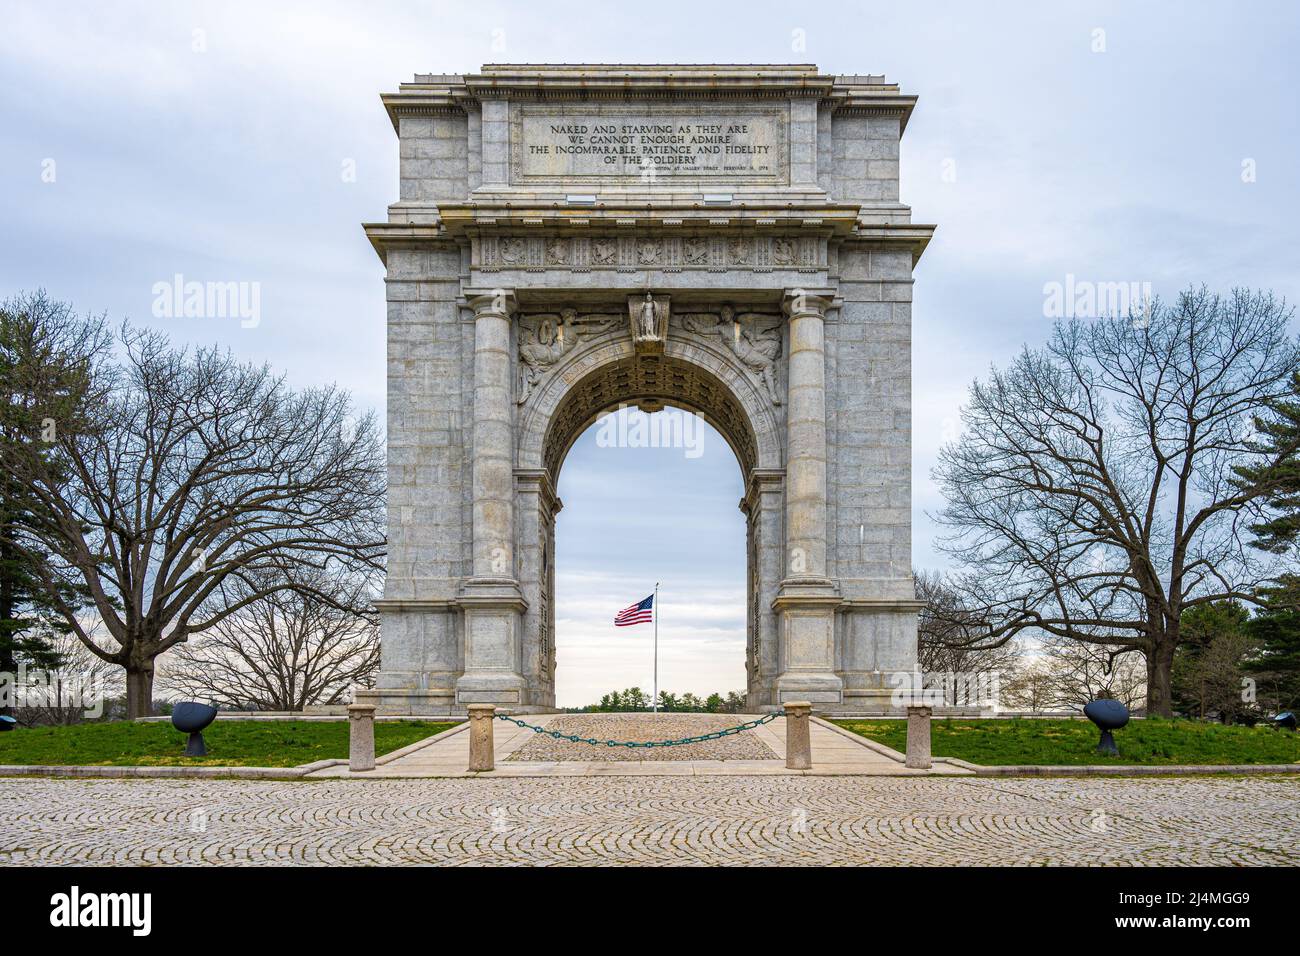 https://c8.alamy.com/comp/2J4MGG9/national-memorial-arch-at-valley-forge-national-historical-park-in-valley-forge-pennsylvania-usa-2J4MGG9.jpg